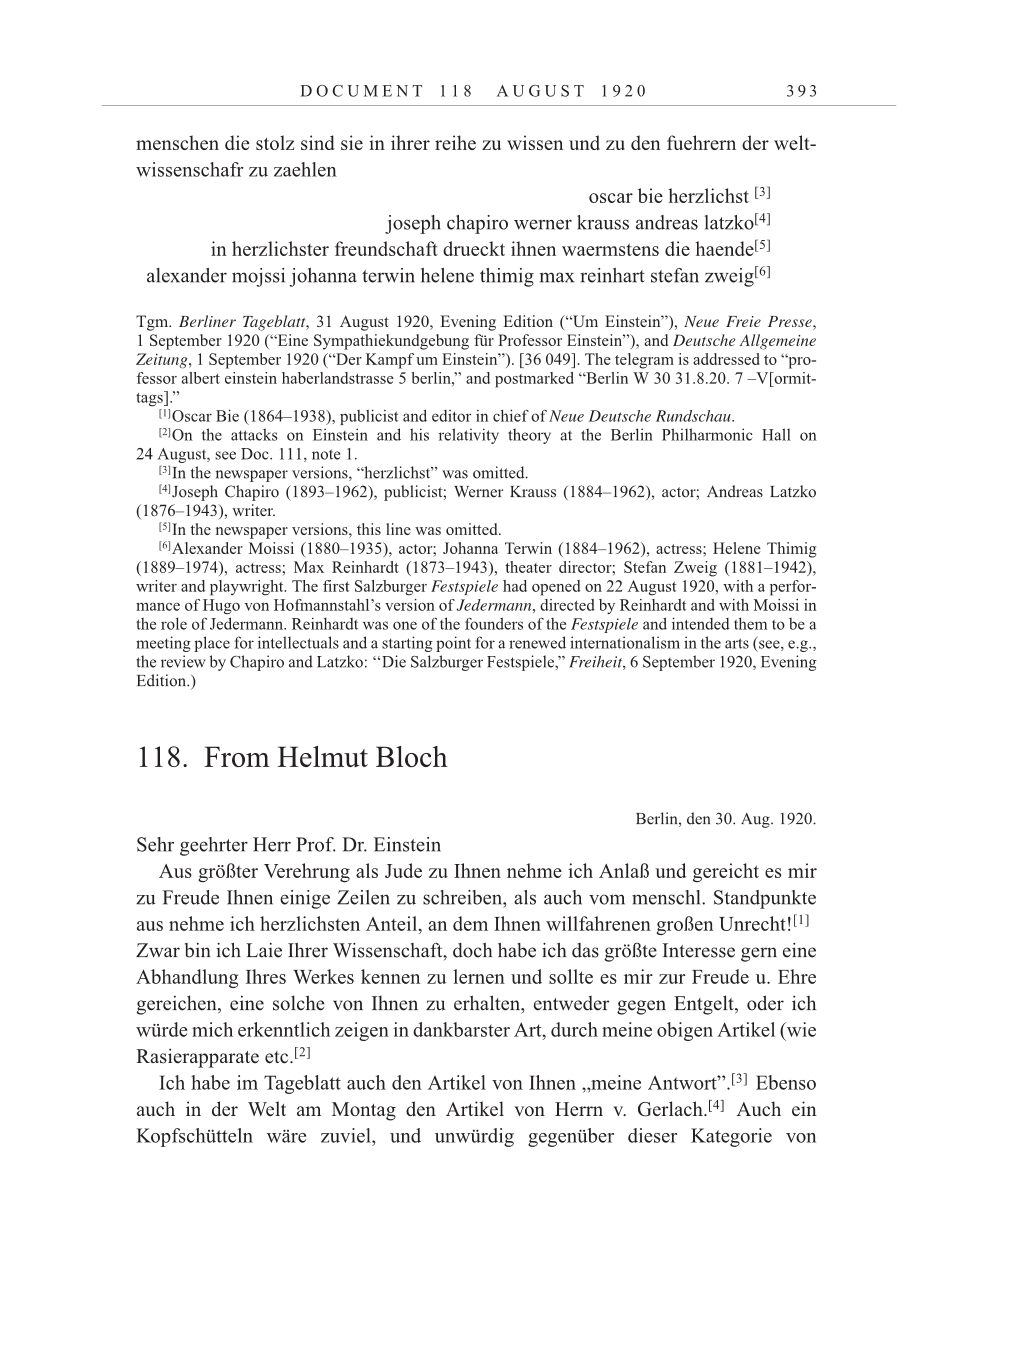 Volume 10: The Berlin Years: Correspondence May-December 1920 / Supplementary Correspondence 1909-1920 page 393